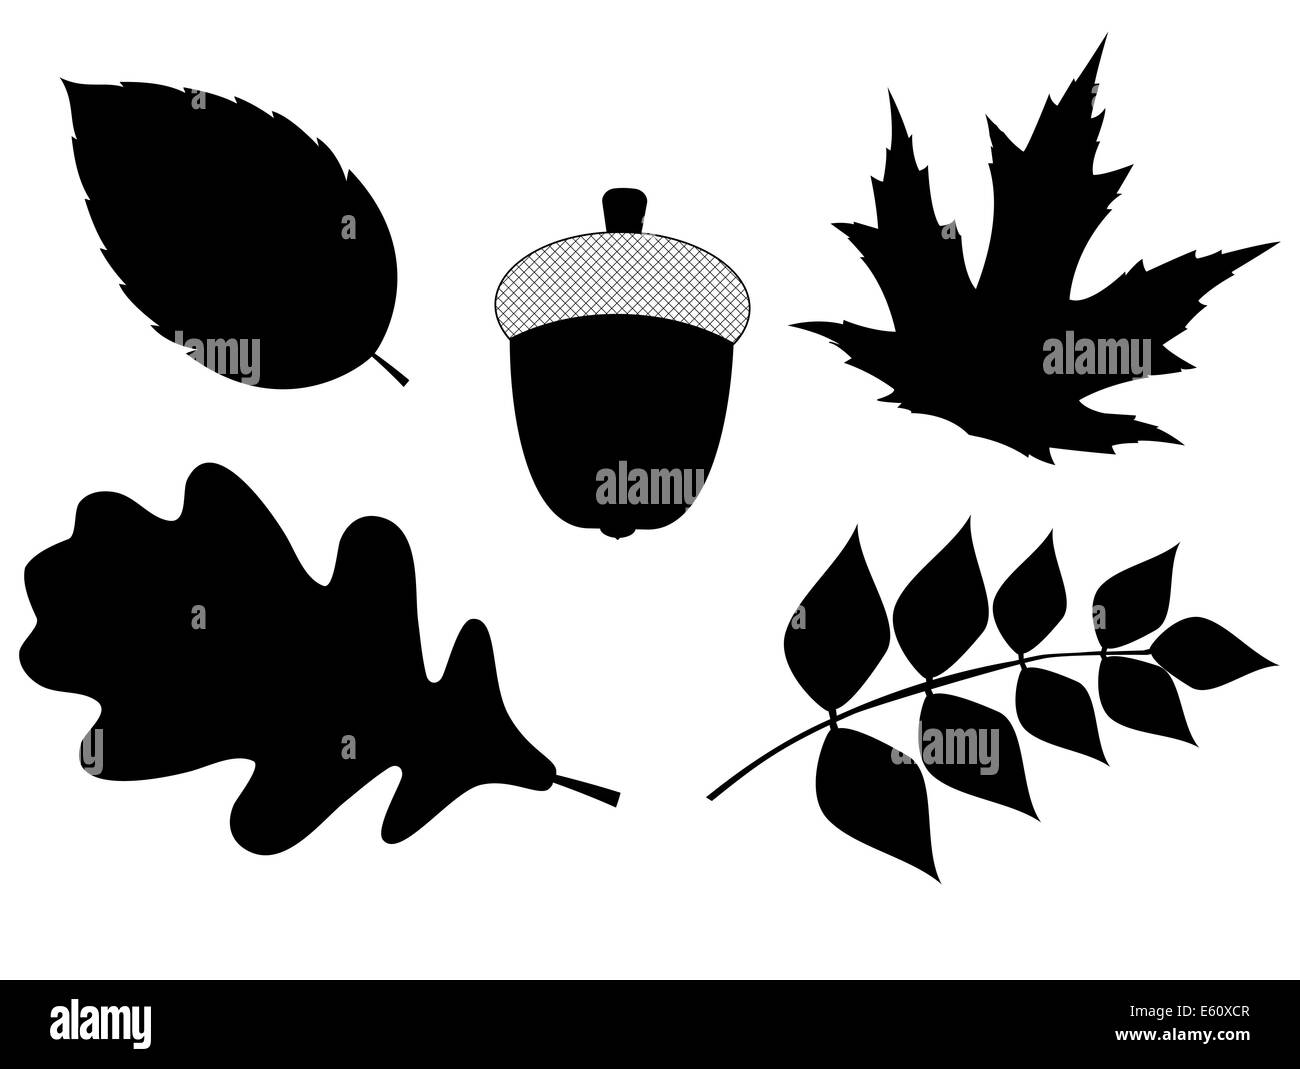 Acorn with Leaves Vector Silhouette Illustration Stock Photo